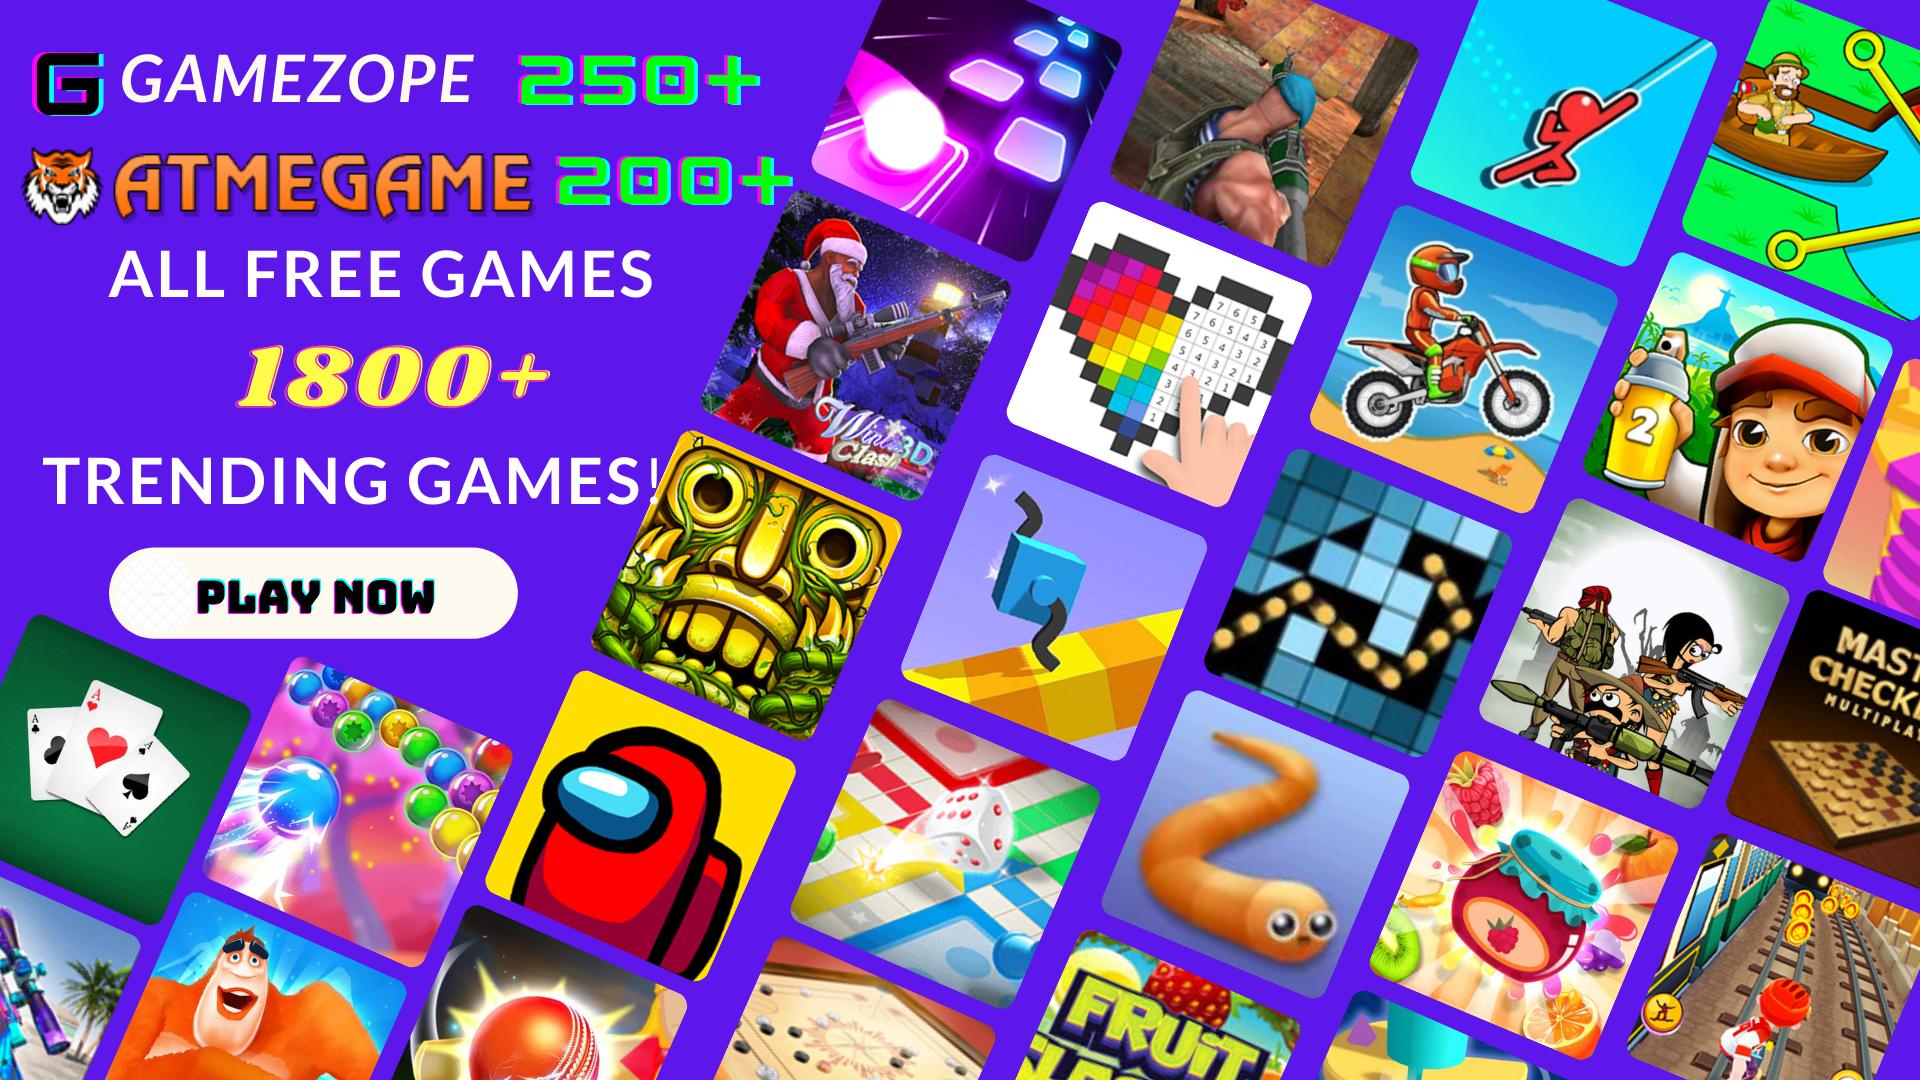 New Games, All Games, Gamezop Pro, All in one Game 1.1.7 Screenshot 1